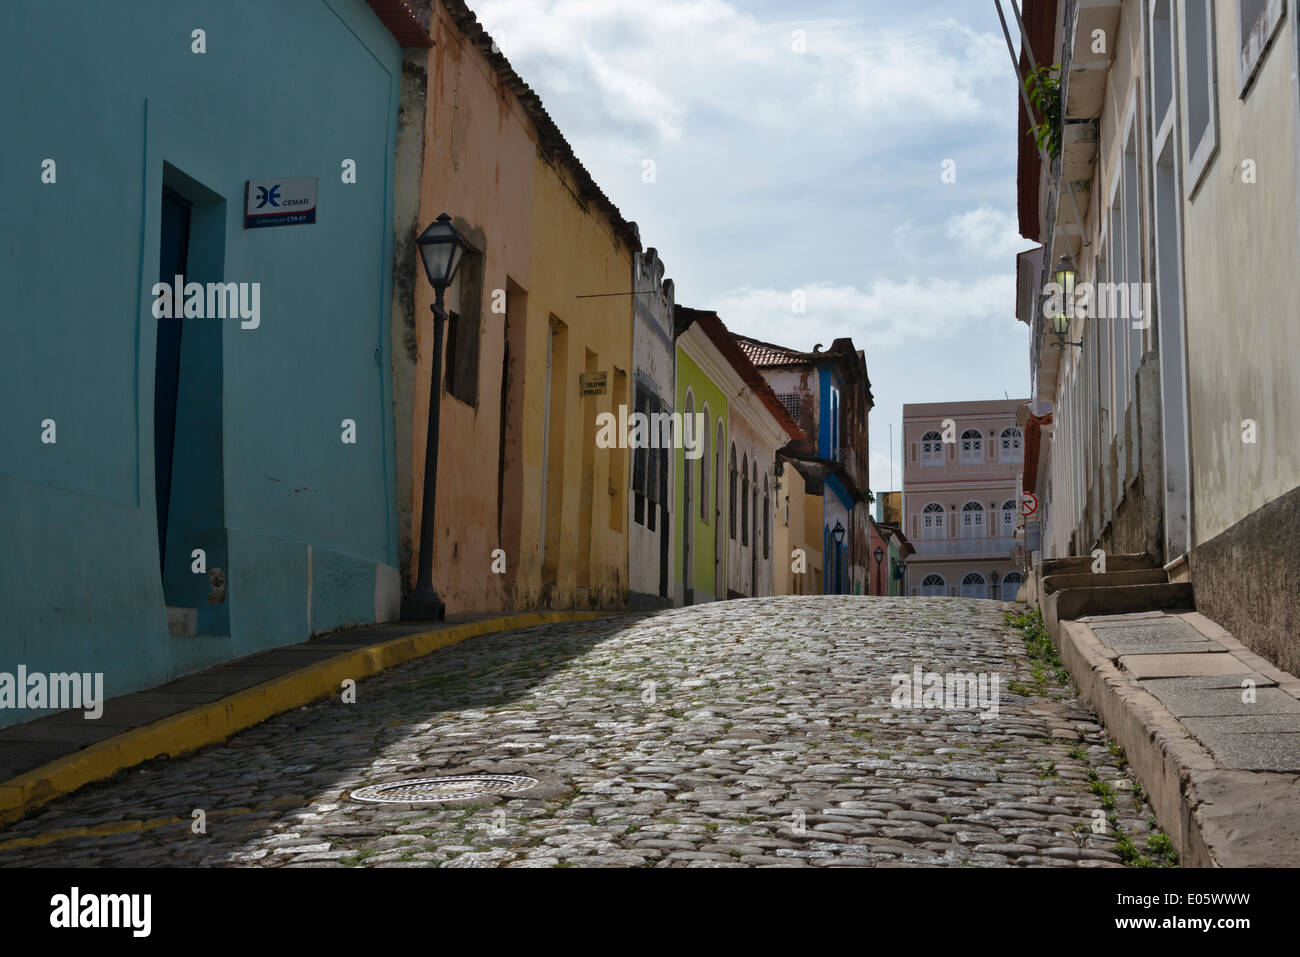 Buildings and cobbled street in historic center of Sao Luis (UNESCO World Heritage site), Maranhao State, Brazil Stock Photo